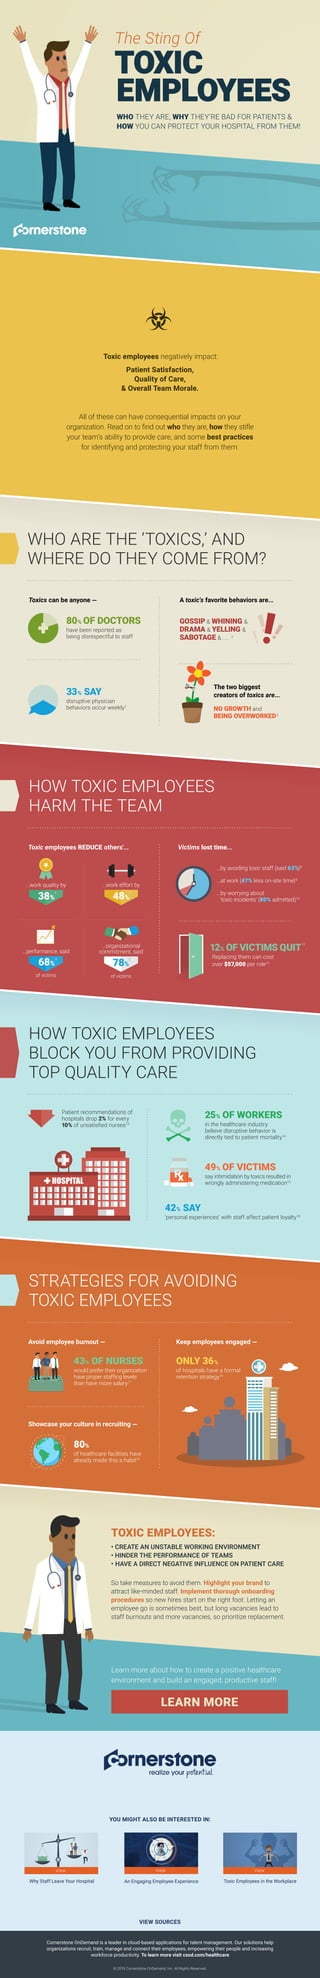 78%
...organizational
commitment, said
of victims
5
HOW TOXIC EMPLOYEES
HARM THE TEAM
Toxic employees REDUCE others’... Victims lost time...
38%
...work quality by
of victims
68%
...performance, said
80% OF DOCTORS
have been reported as
being disrespectful to staff
Toxics can be anyone —
Patient recommendations of
hospitals drop 2% for every
10% of unsatisﬁed nurses13
42% SAY
‘personal experiences’ with staff affect patient loyalty16
25% OF WORKERS
in the healthcare industry
believe disruptive behavior is
directly tied to patient mortality14
49% OF VICTIMS
say intimidation by toxics resulted in
wrongly administering medication15
43% OF NURSES
would prefer their organization
have proper stafﬁng levels
than have more salary17
ONLY 36%
of hospitals have a formal
retention strategy19
80%
of healthcare facilities have
already made this a habit18
TOXIC EMPLOYEES:
• CREATE AN UNSTABLE WORKING ENVIRONMENT
• HINDER THE PERFORMANCE OF TEAMS
• HAVE A DIRECT NEGATIVE INFLUENCE ON PATIENT CARE
VIEW SOURCES
YOU MIGHT ALSO BE INTERESTED IN:
© 2015 Cornerstone OnDemand, Inc. All Rights Reserved.
Cornerstone OnDemand is a leader in cloud-based applications for talent management. Our solutions help
organizations recruit, train, manage and connect their employees, empowering their people and increasing
workforce productivity. To learn more visit csod.com/healthcare
Toxic Employees in the Workplace
View
Why Staff Leave Your Hospital
View
An Engaging Employee Experience
Learn more about how to create a positive healthcare
environment and build an engaged, productive staff!
LEARN MORE
GOSSIP & WHINING &
DRAMA & YELLING &
SABOTAGE & ... 2
NO GROWTH and
BEING OVERWORKED3
33% SAY
disruptive physician
behaviors occur weekly1
A toxic’s favorite behaviors are...
The two biggest
creators of toxics are...
WHO ARE THE ‘TOXICS,’ AND
WHERE DO THEY COME FROM?
12% OF VICTIMS QUIT
11
Replacing them can cost
over $57,000 per role12
...at work (47% less on-site time)9
...by worrying about
‘toxic incidents’ (80% admitted)10
...by avoiding toxic staff (said 63%)8
HOW TOXIC EMPLOYEES
BLOCK YOU FROM PROVIDING
TOP QUALITY CARE
STRATEGIES FOR AVOIDING
TOXIC EMPLOYEES
Showcase your culture in recruiting —
Keep employees engaged —Avoid employee burnout —
All of these can have consequential impacts on your
organization. Read on to ﬁnd out who they are, how they stifle
your team’s ability to provide care, and some best practices
for identifying and protecting your staff from them.
Toxic employees negatively impact:
Patient Satisfaction,
Quality of Care,
& Overall Team Morale.
So take measures to avoid them. Highlight your brand to
attract like-minded staff. Implement thorough onboarding
procedures so new hires start on the right foot. Letting an
employee go is sometimes best, but long vacancies lead to
staff burnouts and more vacancies, so prioritize replacement.
The Sting Of
TOXIC
EMPLOYEES
WHO THEY ARE, WHY THEY’RE BAD FOR PATIENTS &
HOW YOU CAN PROTECT YOUR HOSPITAL FROM THEM!
4
6
48%
...work effort by
7
View
 